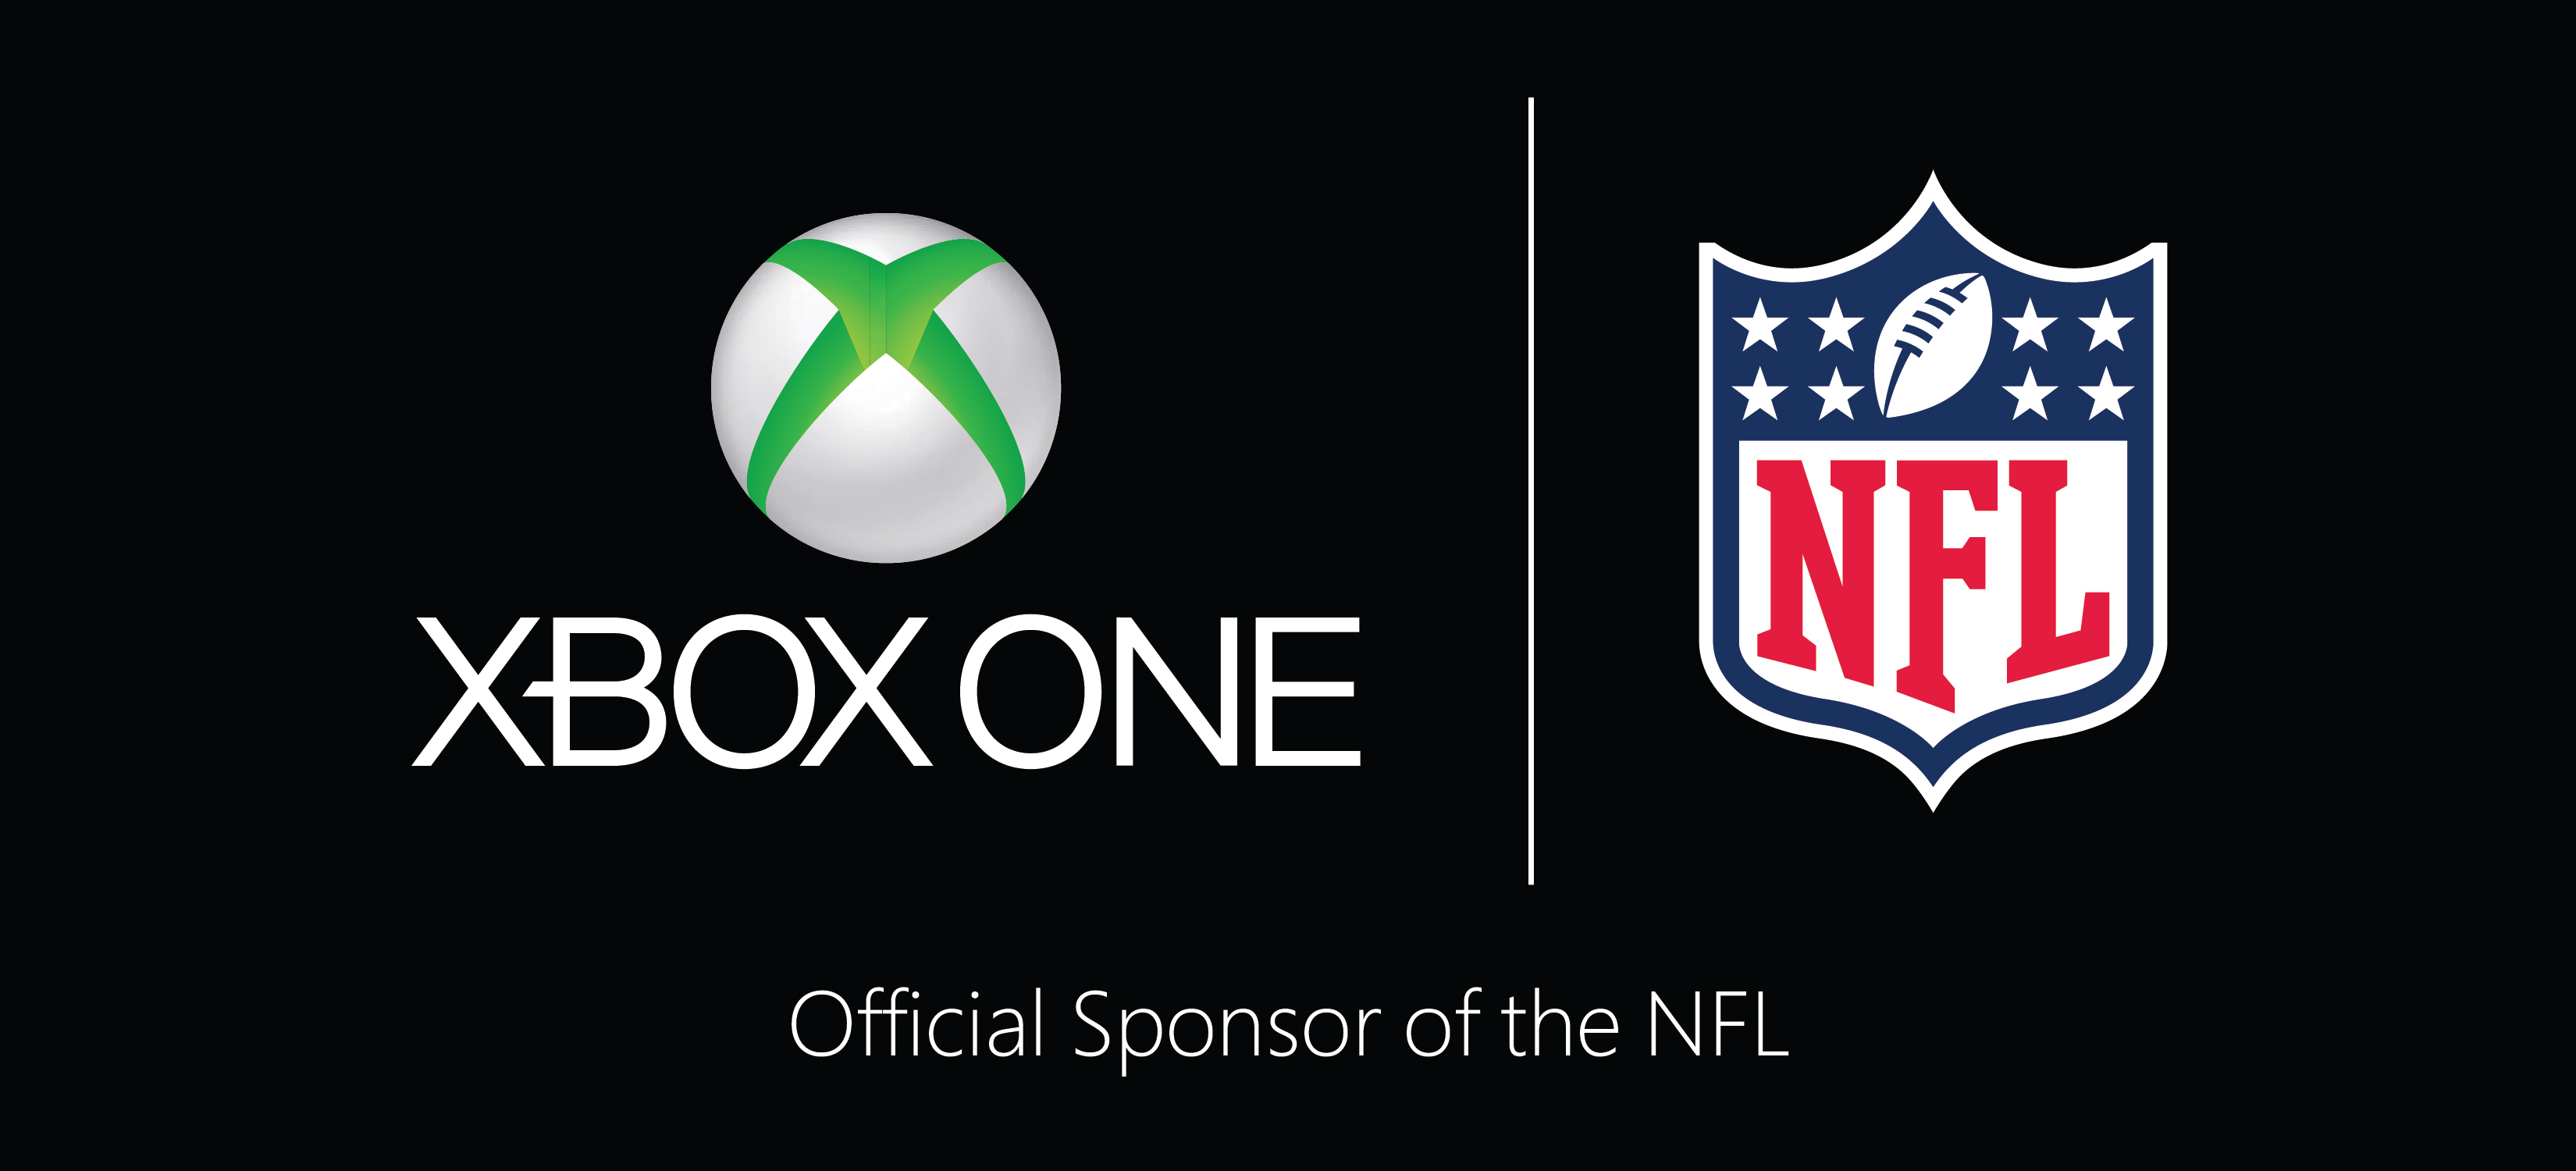 nfl network on xbox